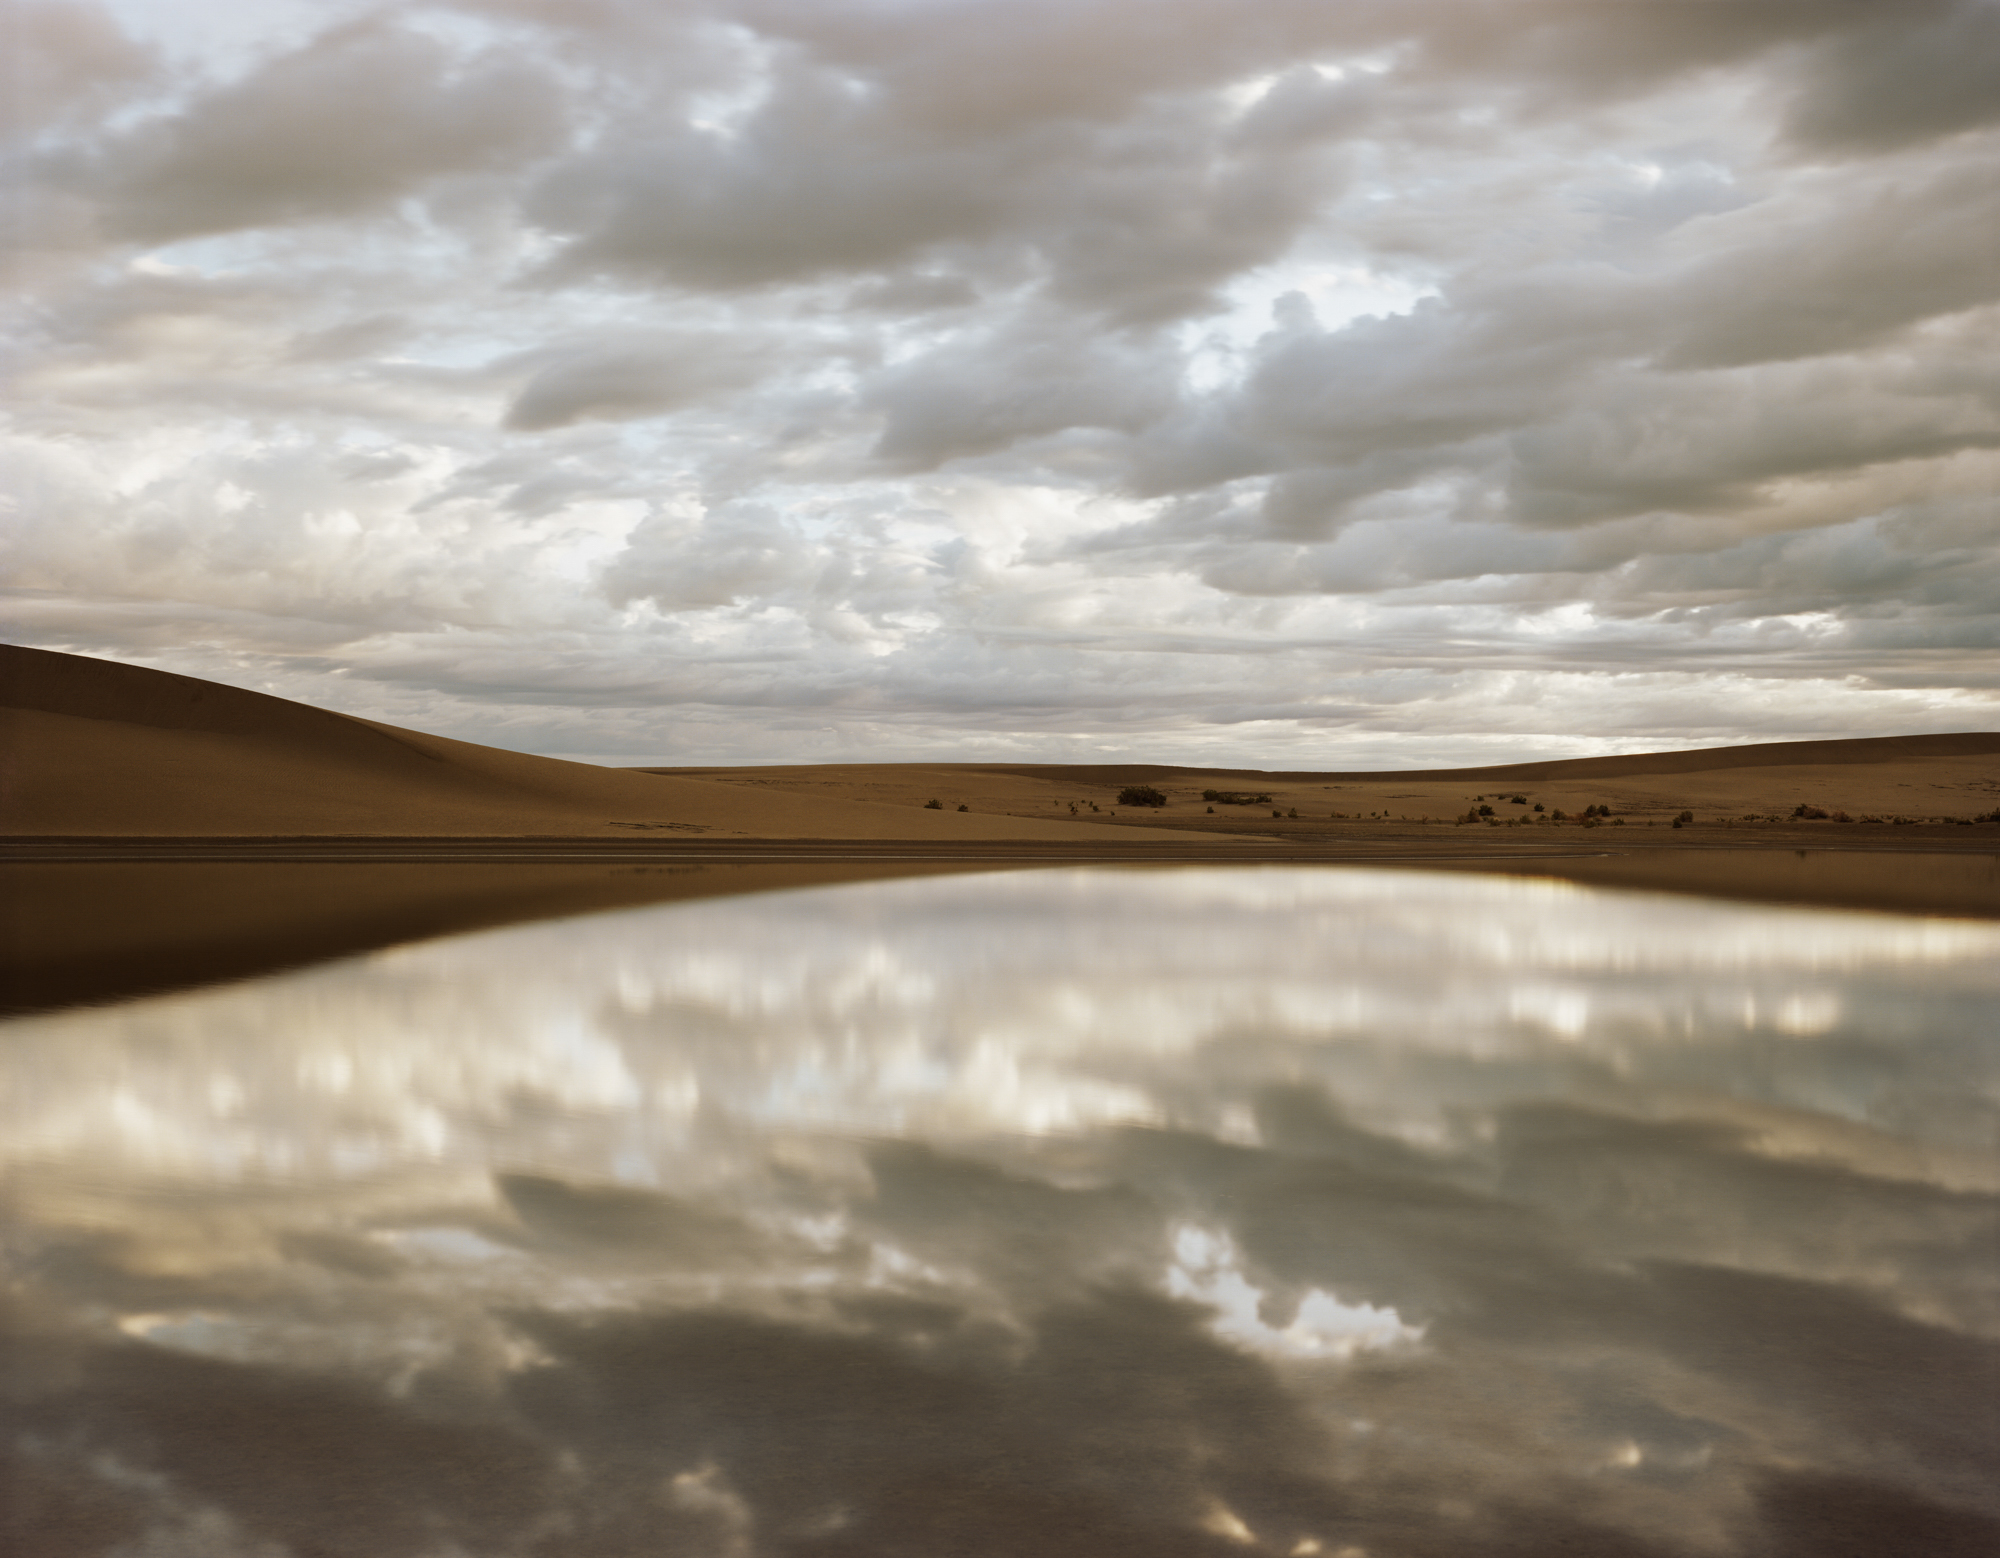 Color photograph of a lake within a desert reflecting the cloudy sky above